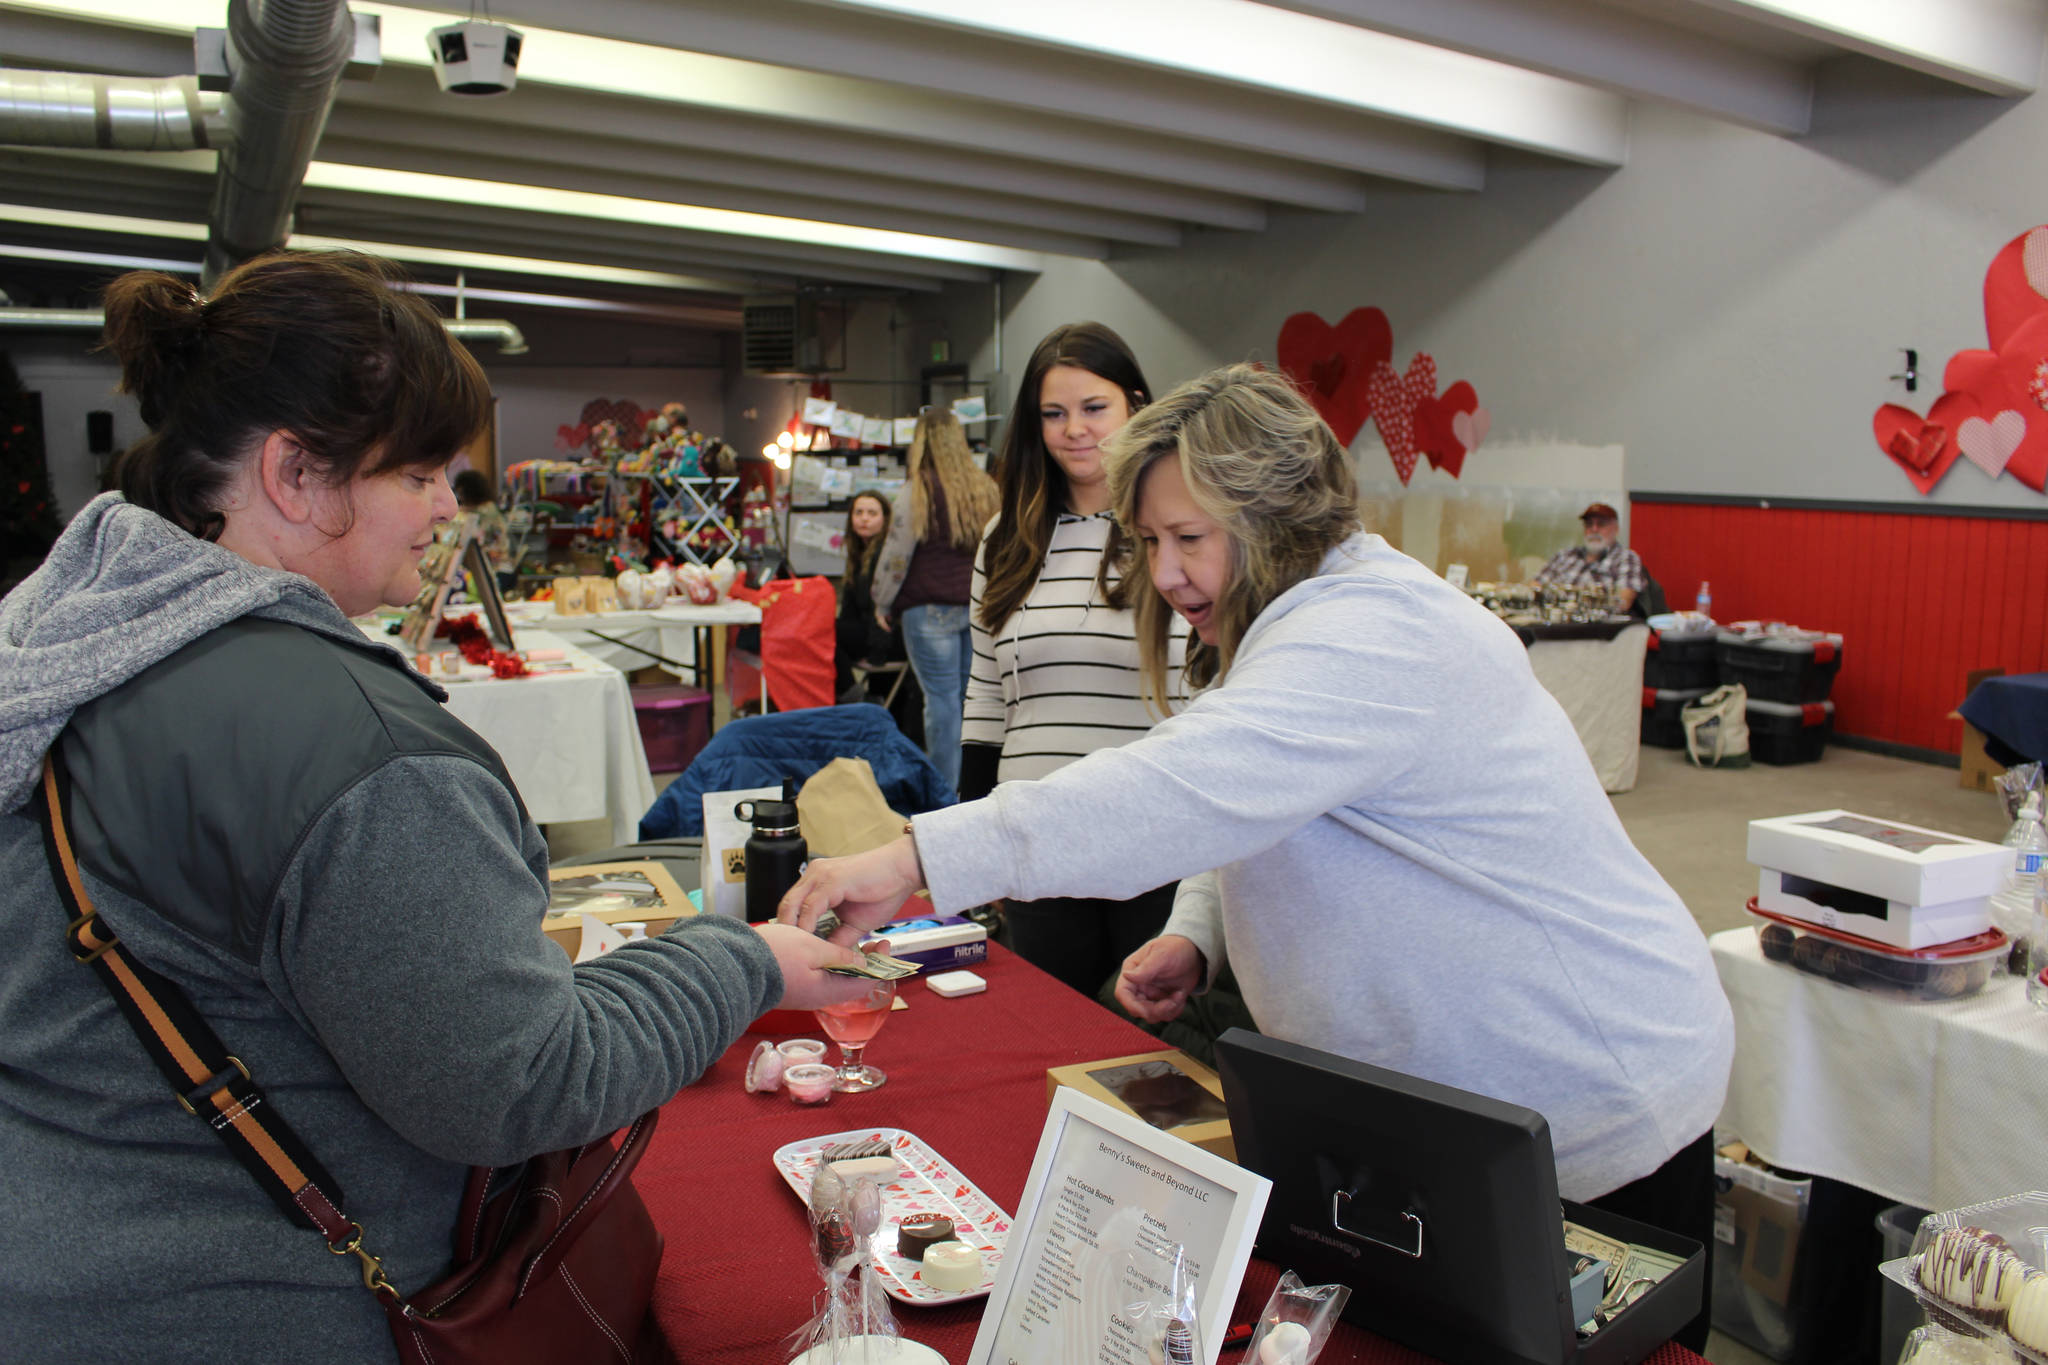 Robin Hahn, left, of Soldotna buys some hot cocoa bombs from Sherian Soares, right, and Ashley Soares, center, owners of Benny’s Sweets and Beyond, at a Valentine’s Bazaar in Soldotna, Alaska on Feb. 6, 2021. (Photo by Brian Mazurek/Peninsula Clarion)